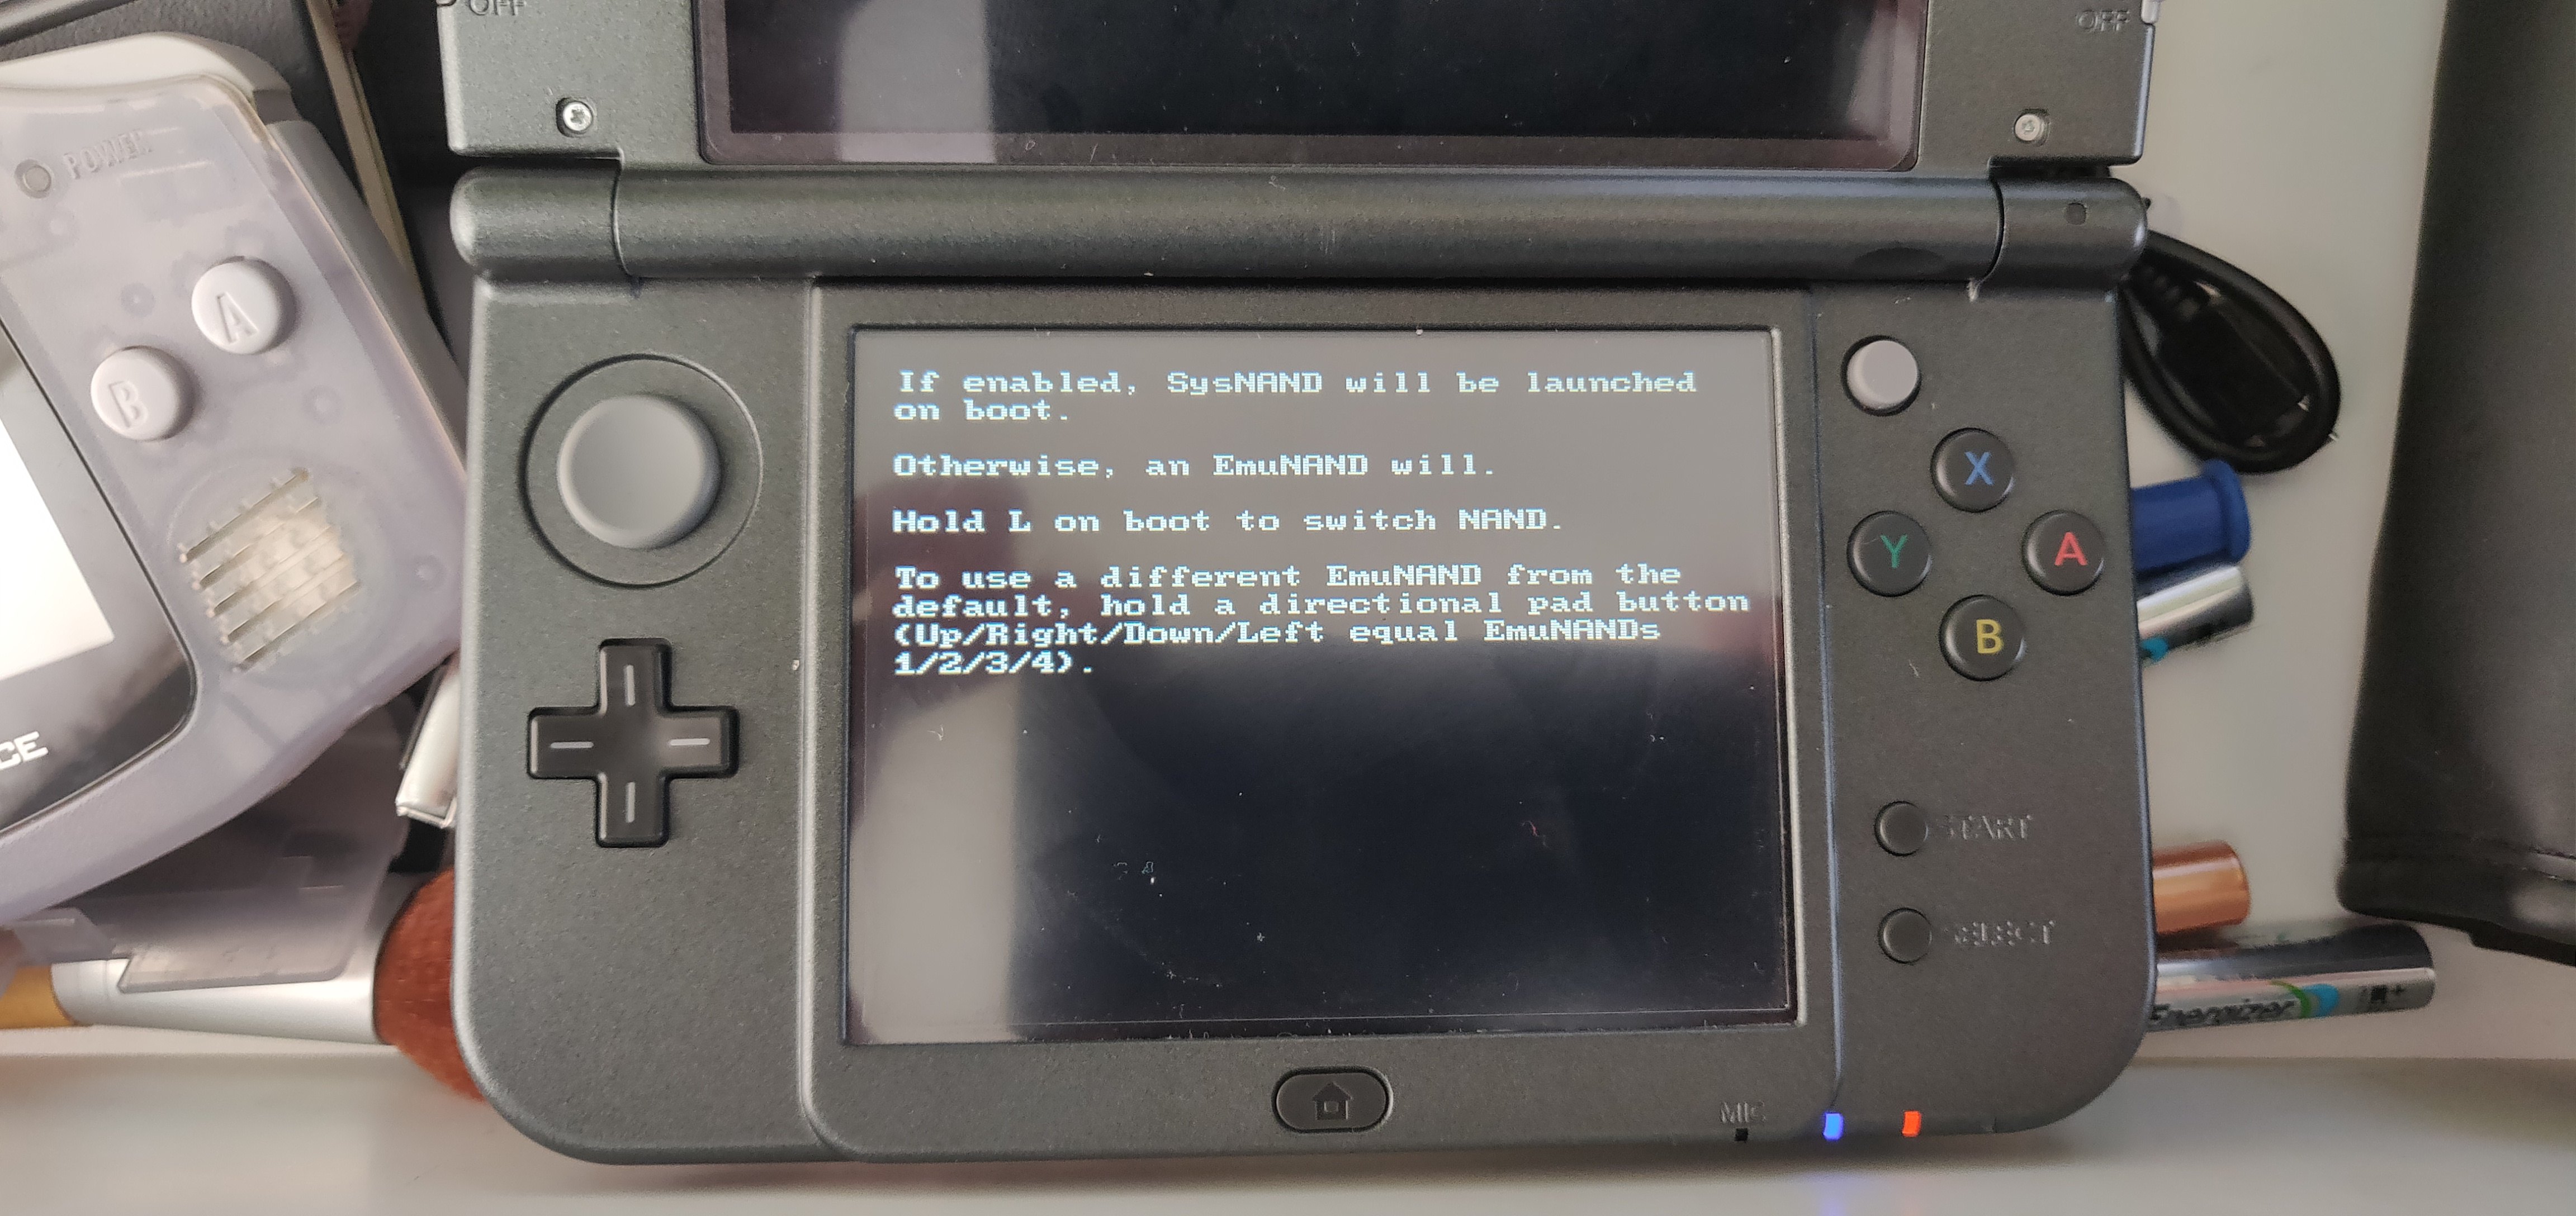 New 3DS XL - Blue Light On then fades, Top Screen Flashes 1 sec when SD  Card is inside | GBAtemp.net - The Independent Video Game Community